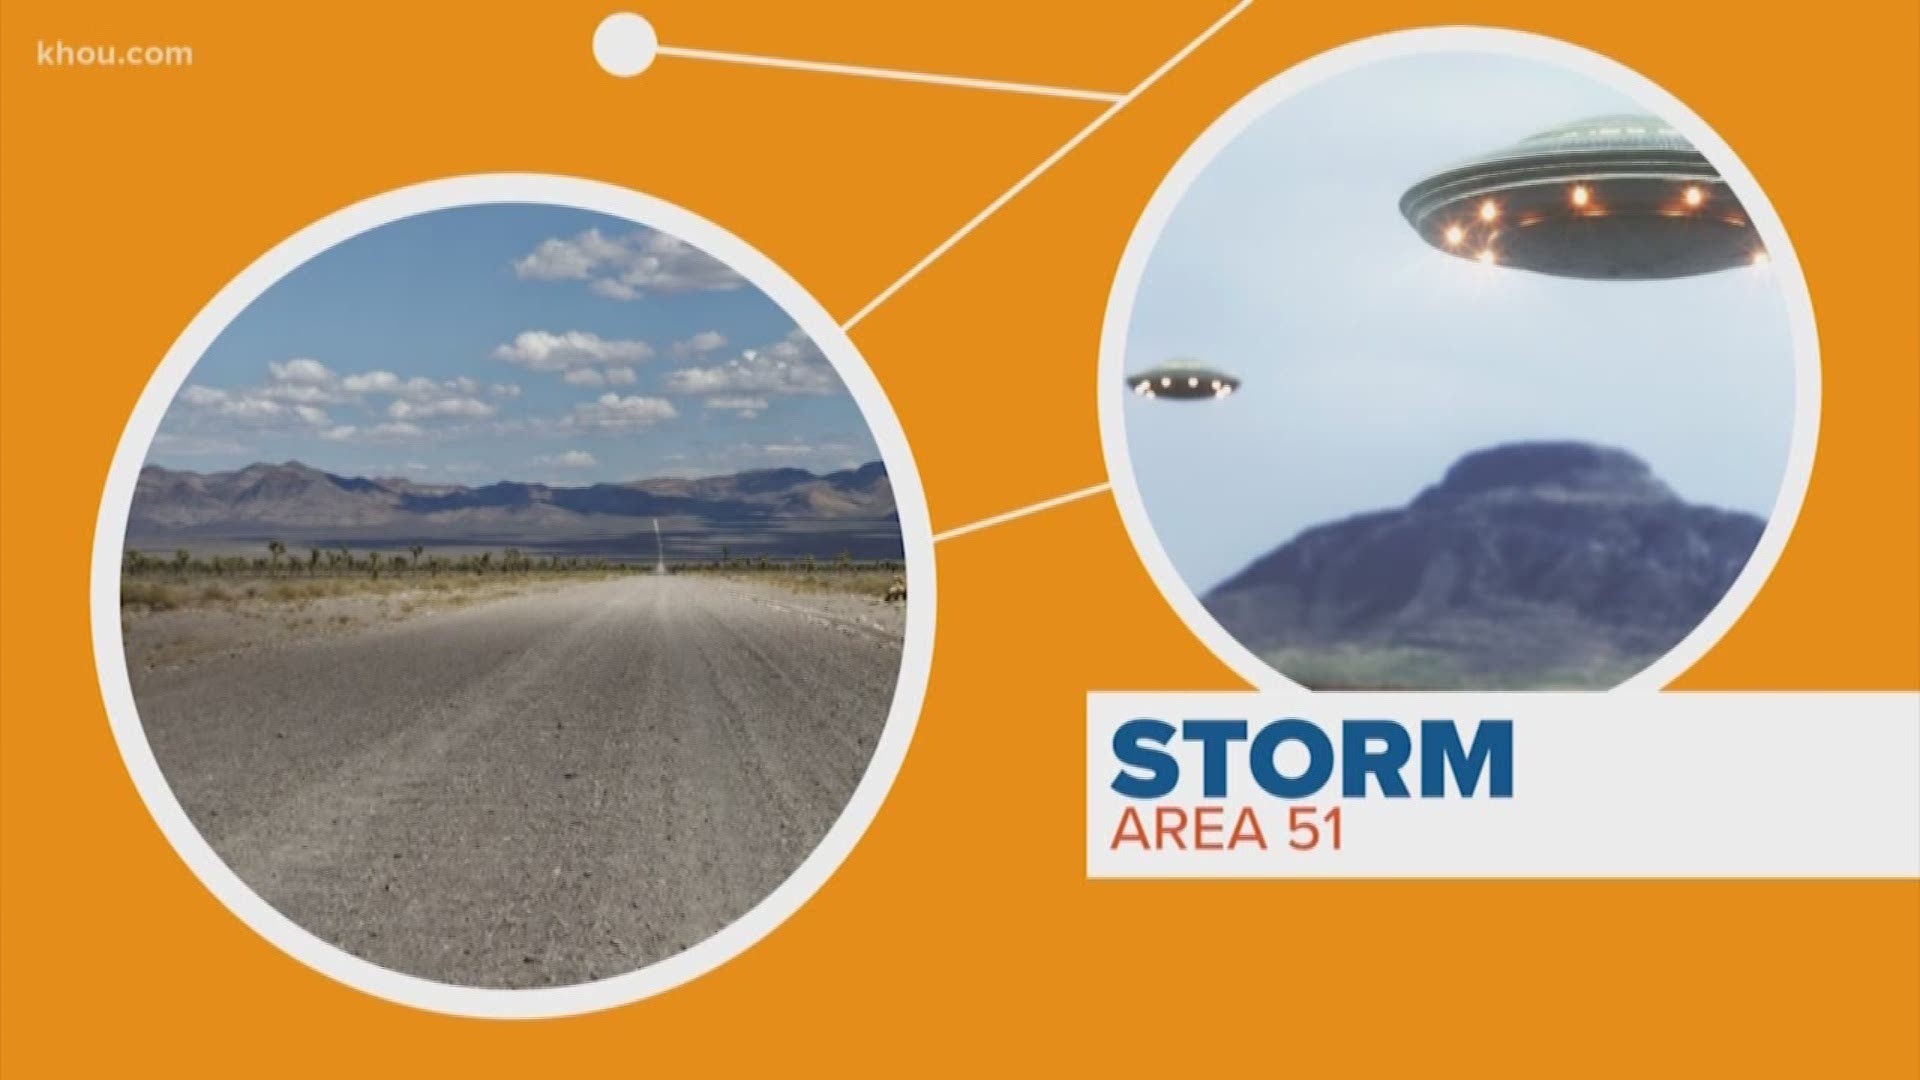 By now, you've probably seen this viral event, floating around Facebook.  More than a million people are signed up to try to get inside Area 51.  So what's the story behind this. Is it really happening? Larry Seward connects the dots.